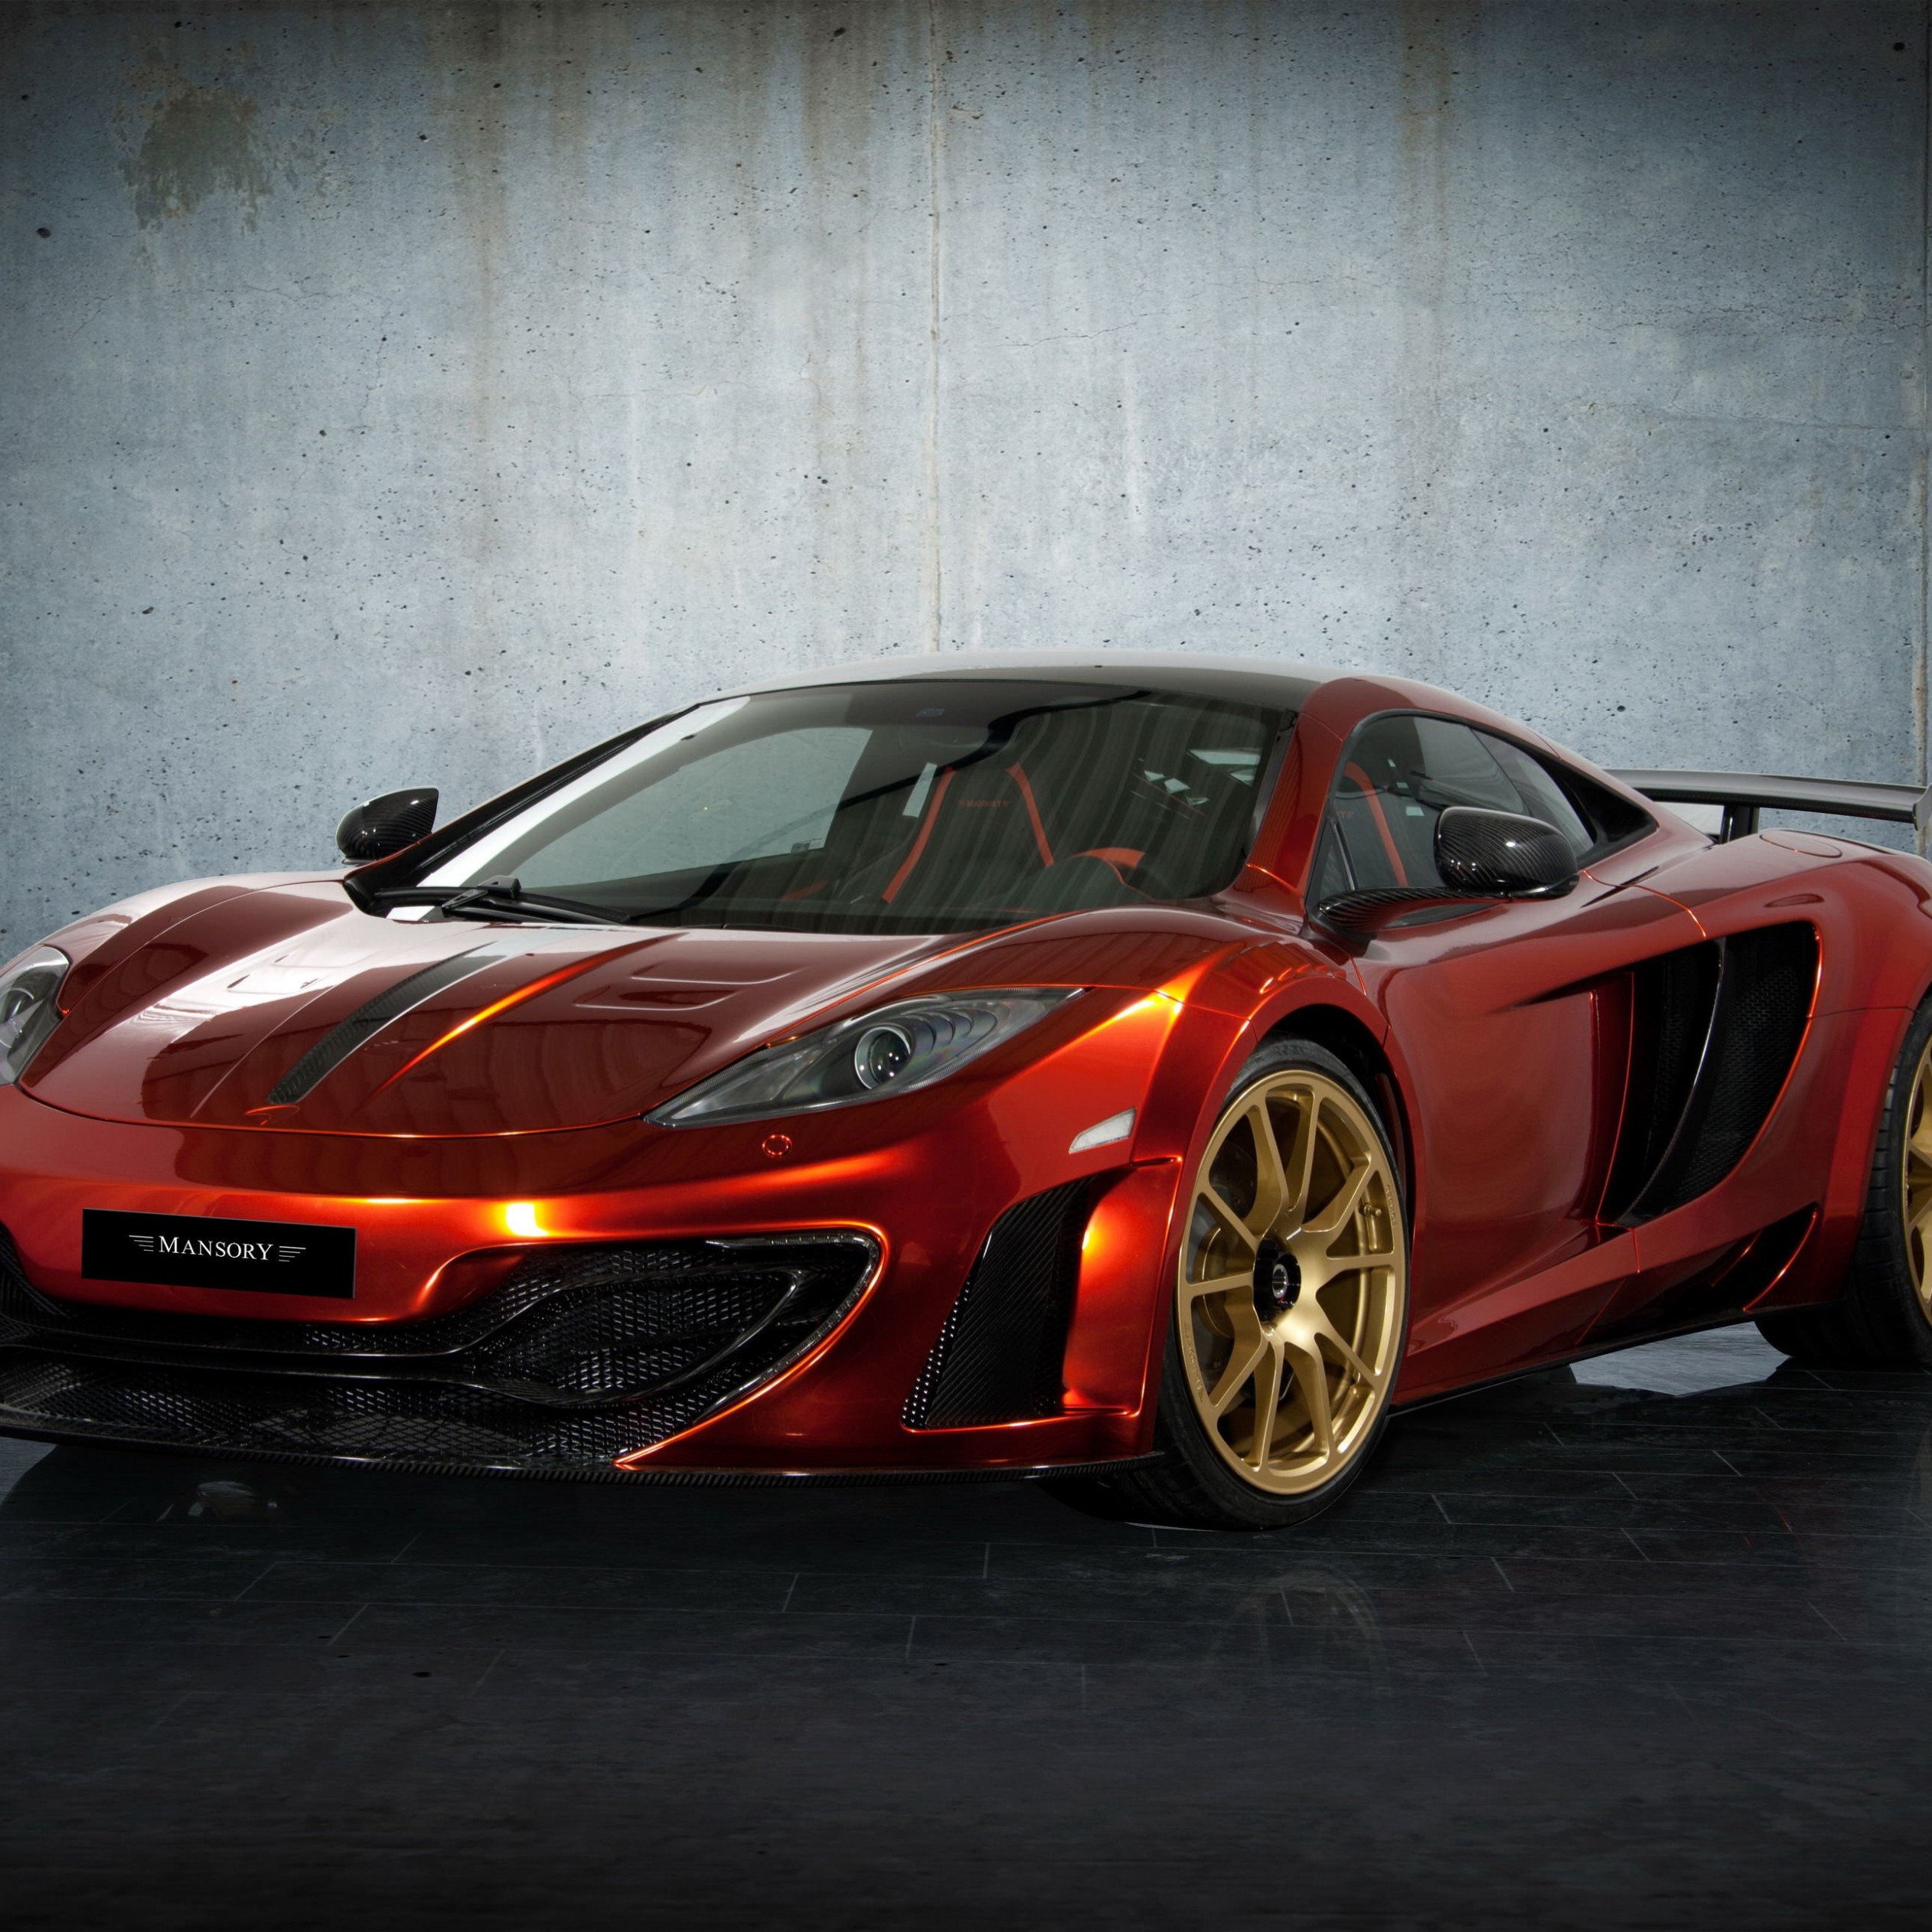 McLaren MP4-12Cf By Mansory Wallpaper for Apple iPad Air